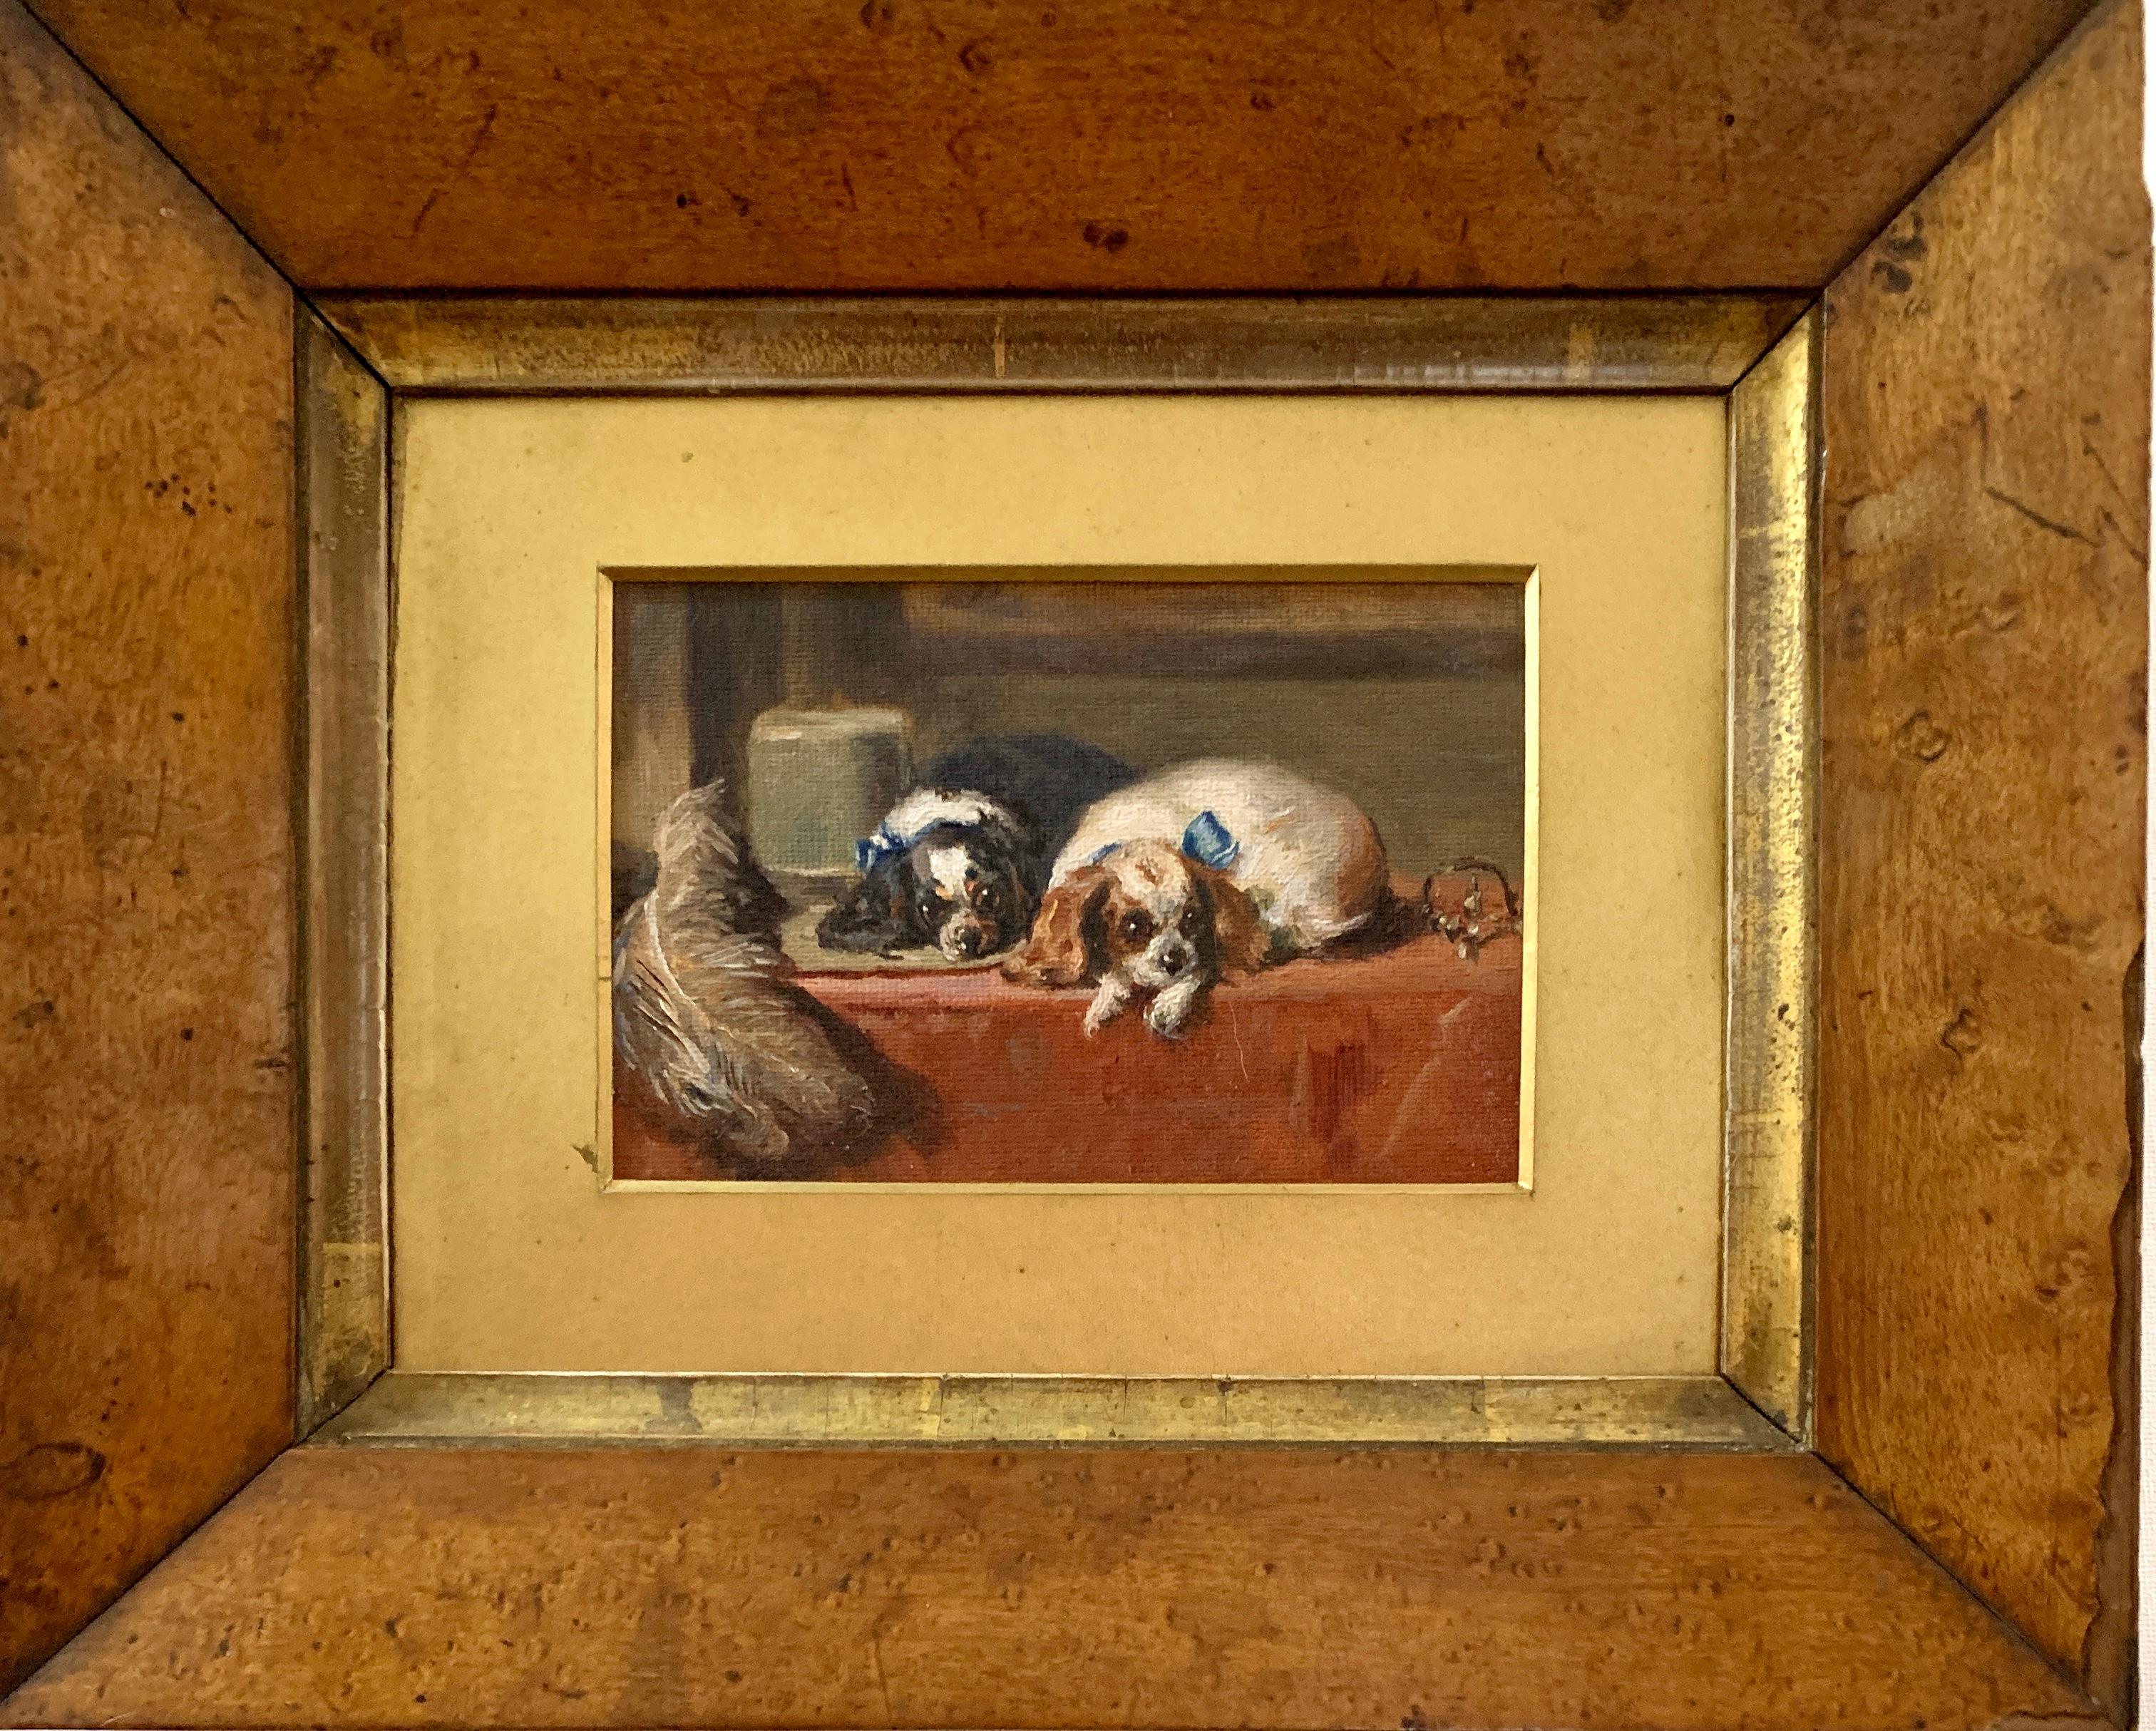 Victorian portrait of two seated Spaniels on a cushion in a maple wood frame